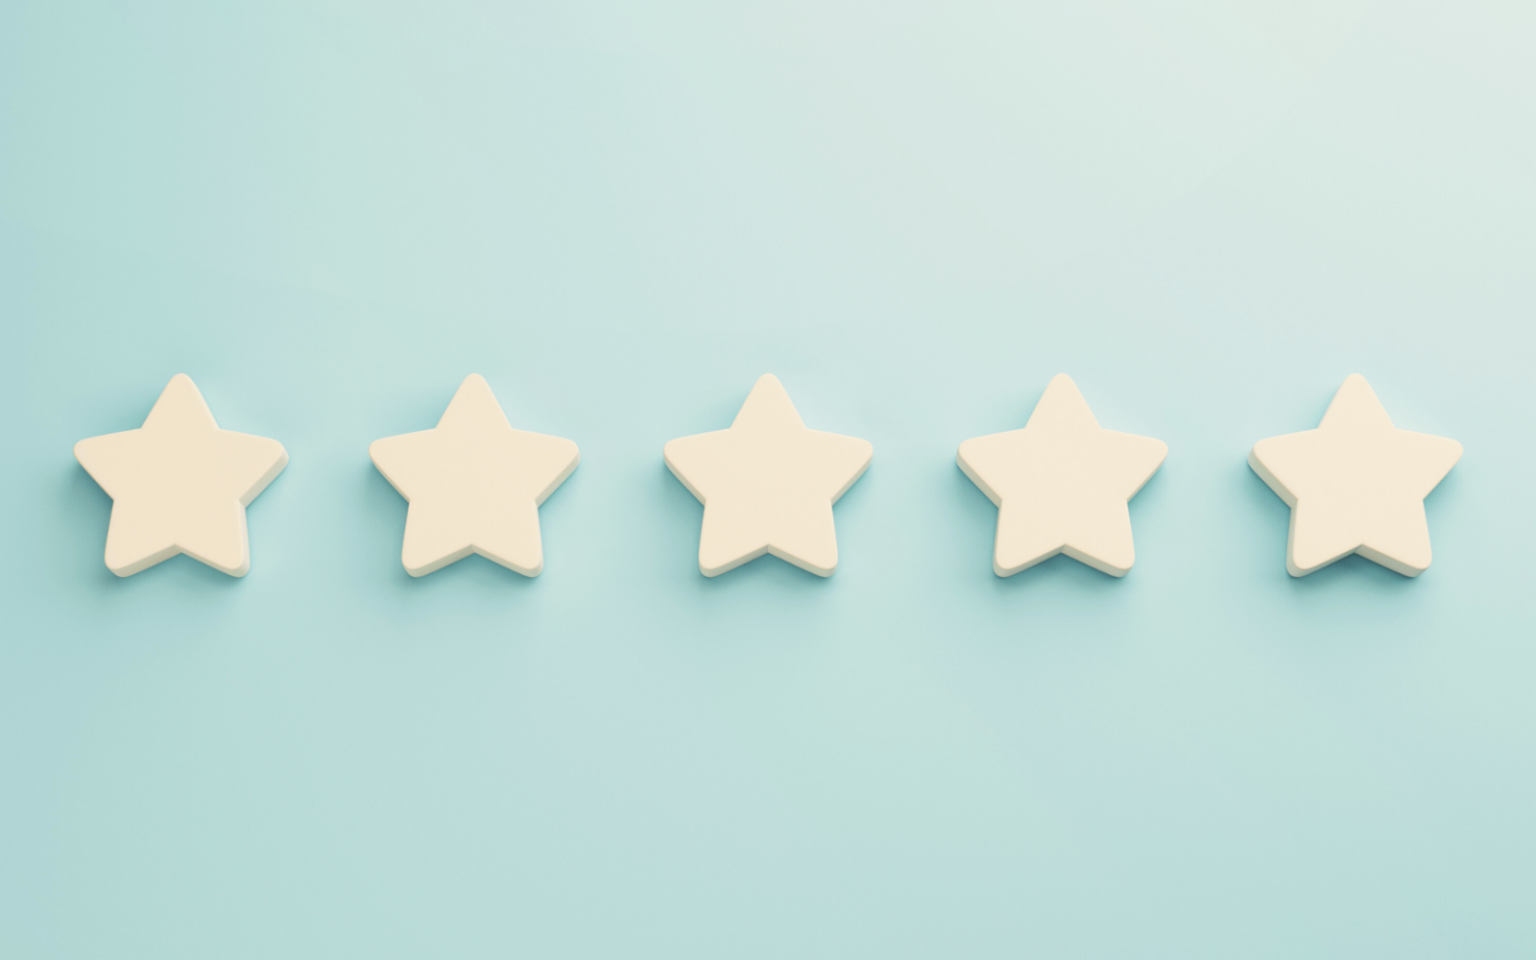 5 stars representing the 5 ways recruiters for IT know what they are doing